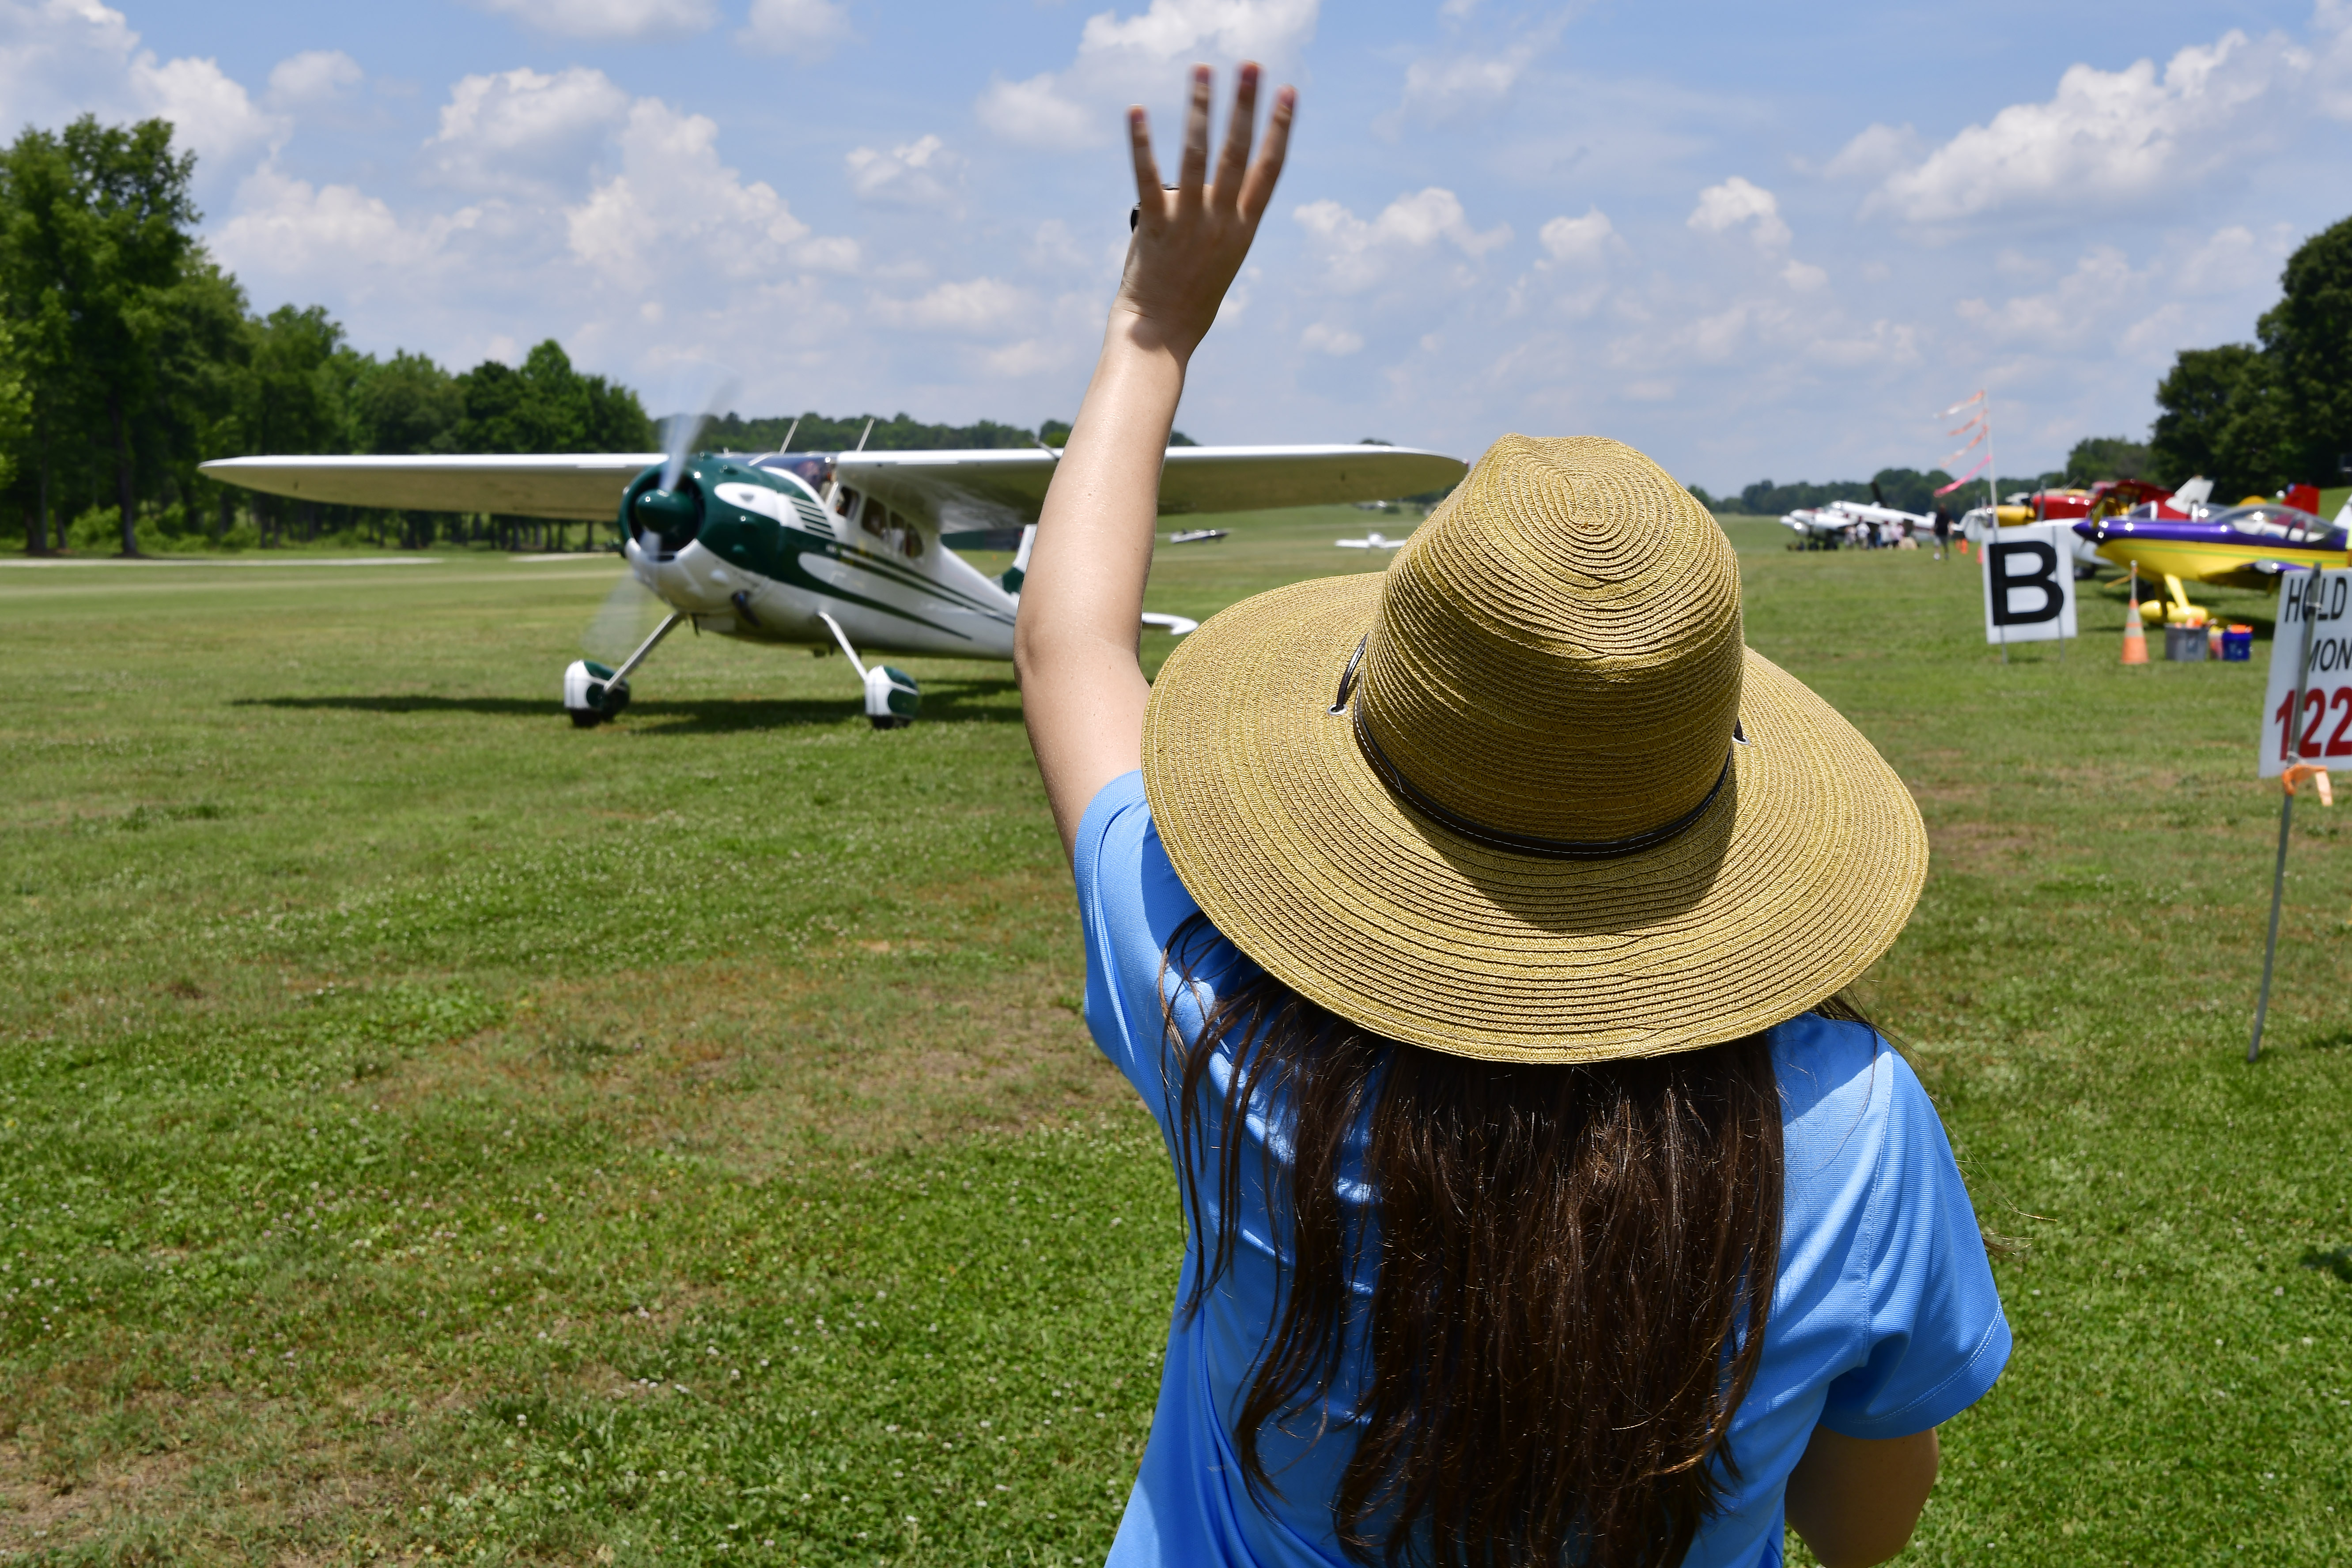 Cayla McLeod waves goodbye to a departing Cessna 195 pilot during the Young Aviators Fly-In at Triple Tree Aerodrome in Woodruff, South Carolina, June 8 to 10. Photo by David Tulis.